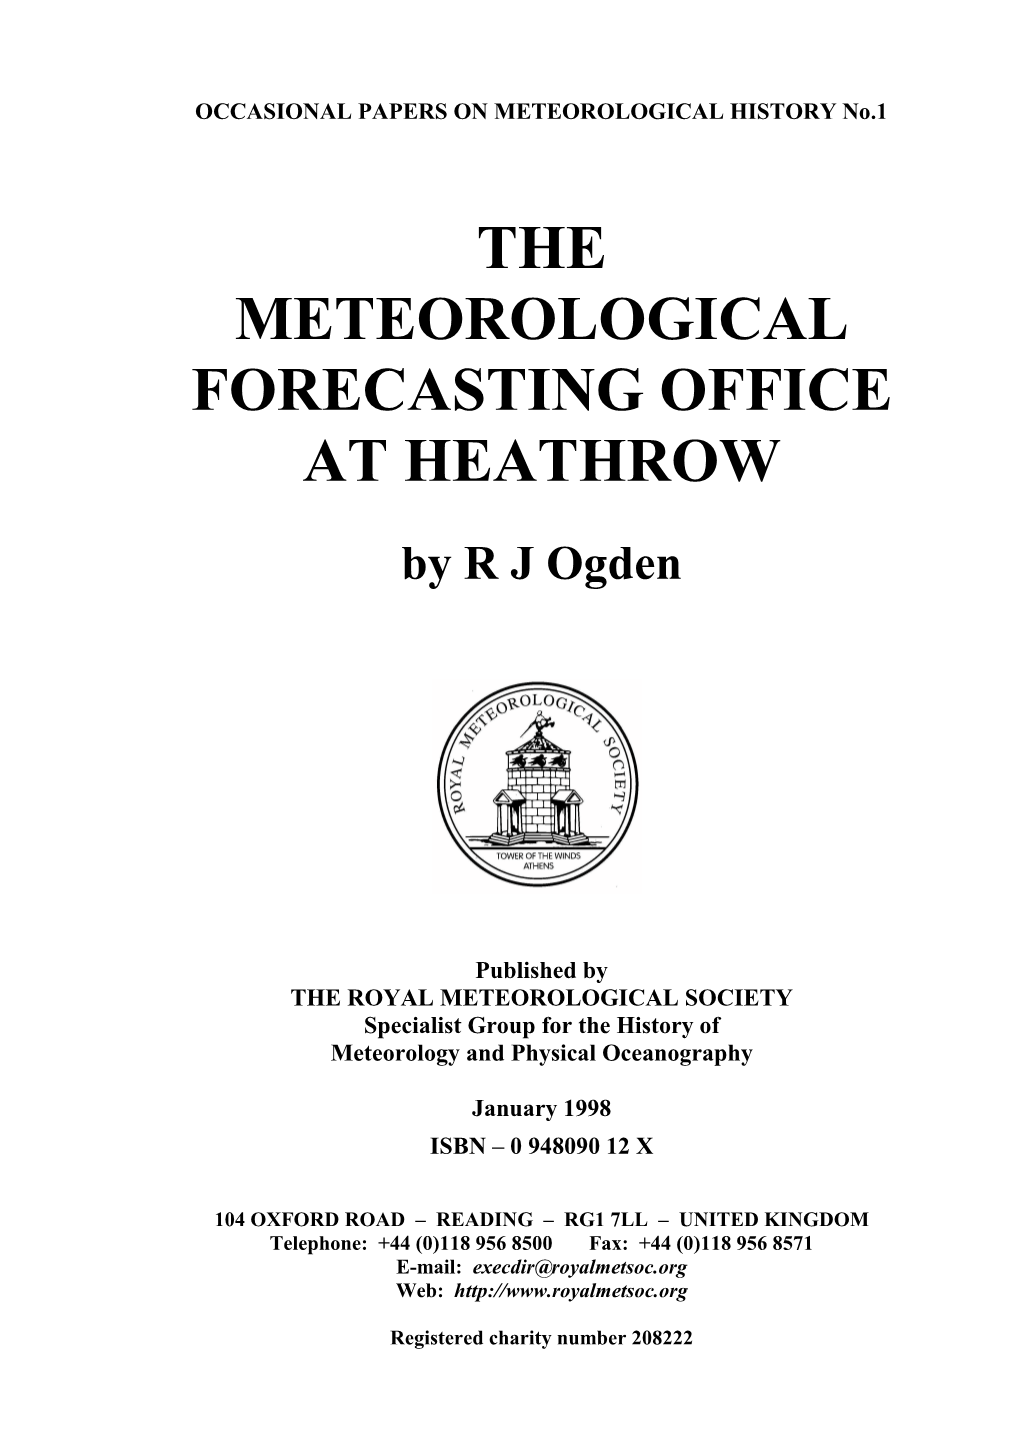 OCCASIONAL PAPERS on METEOROLOGICAL HISTORY No.1